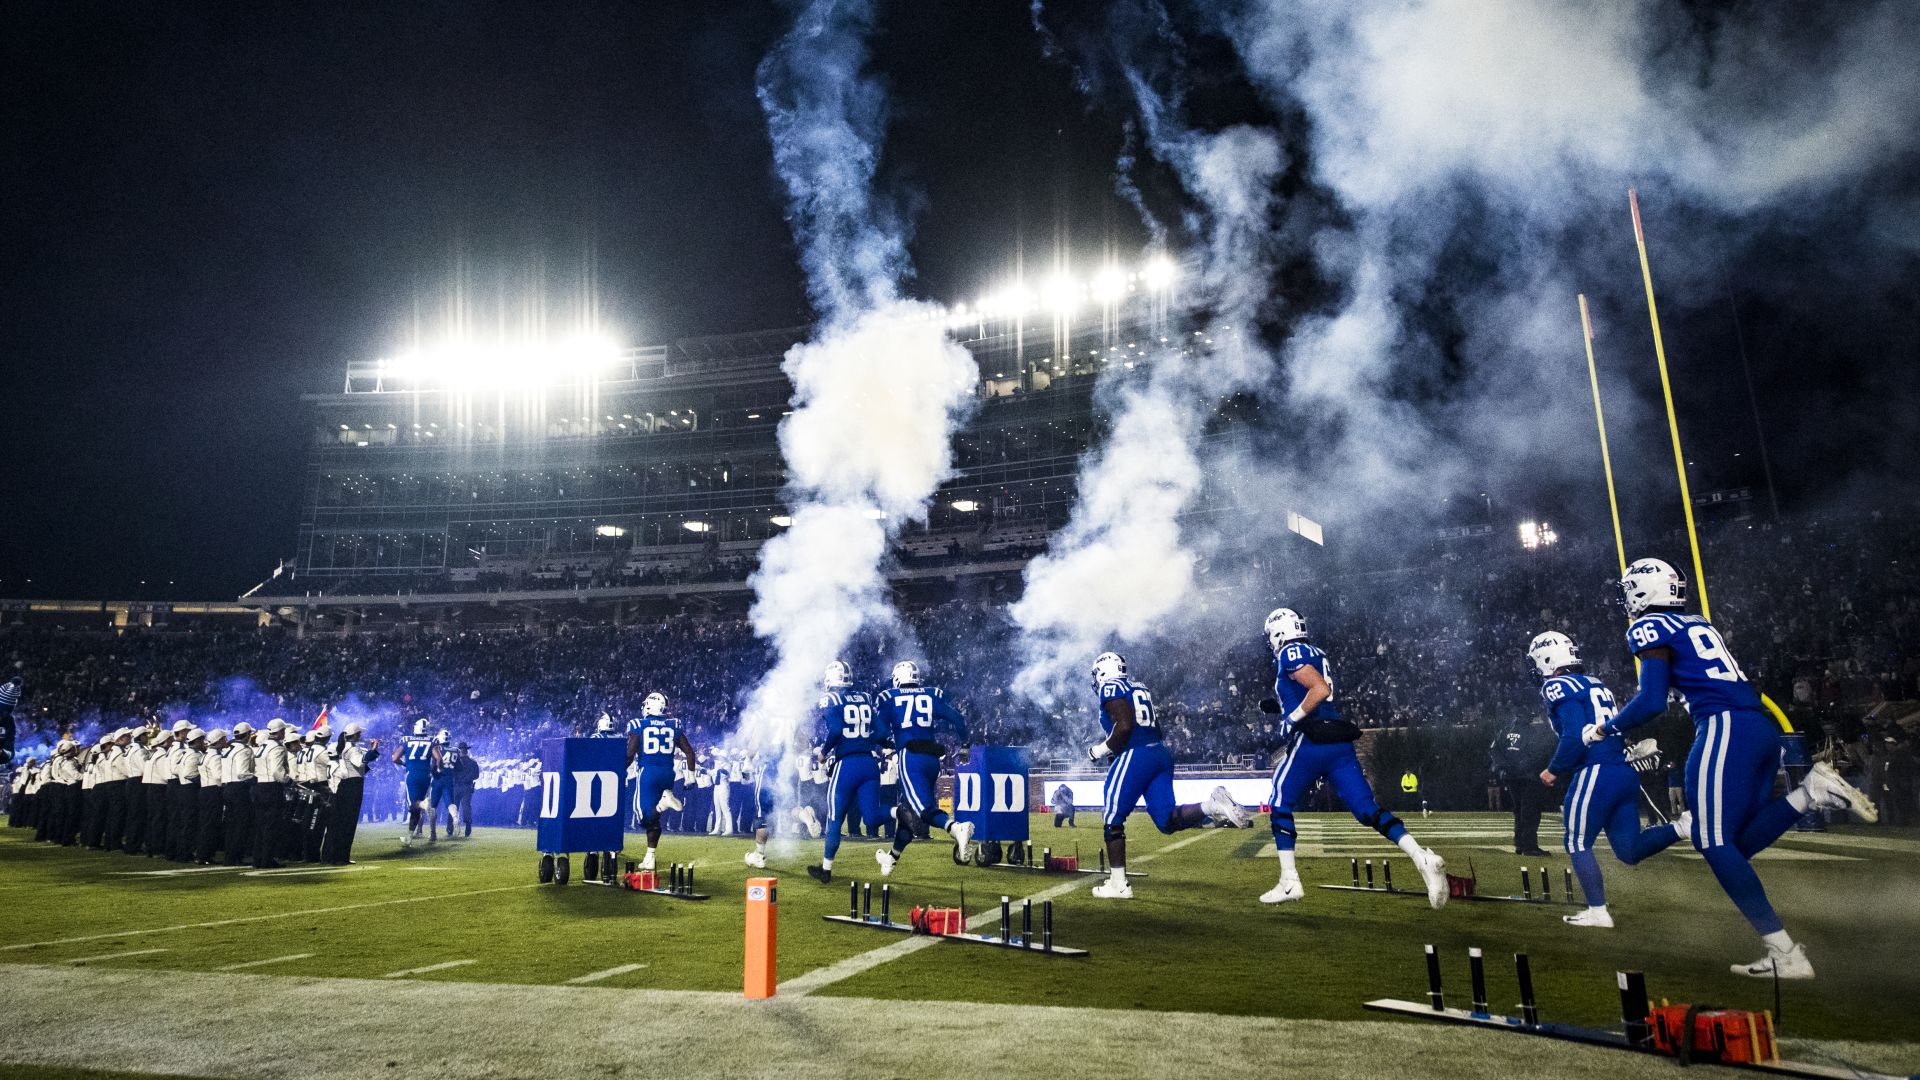 A Group Of People In Blue Uniforms On A Field With A Large Explosion